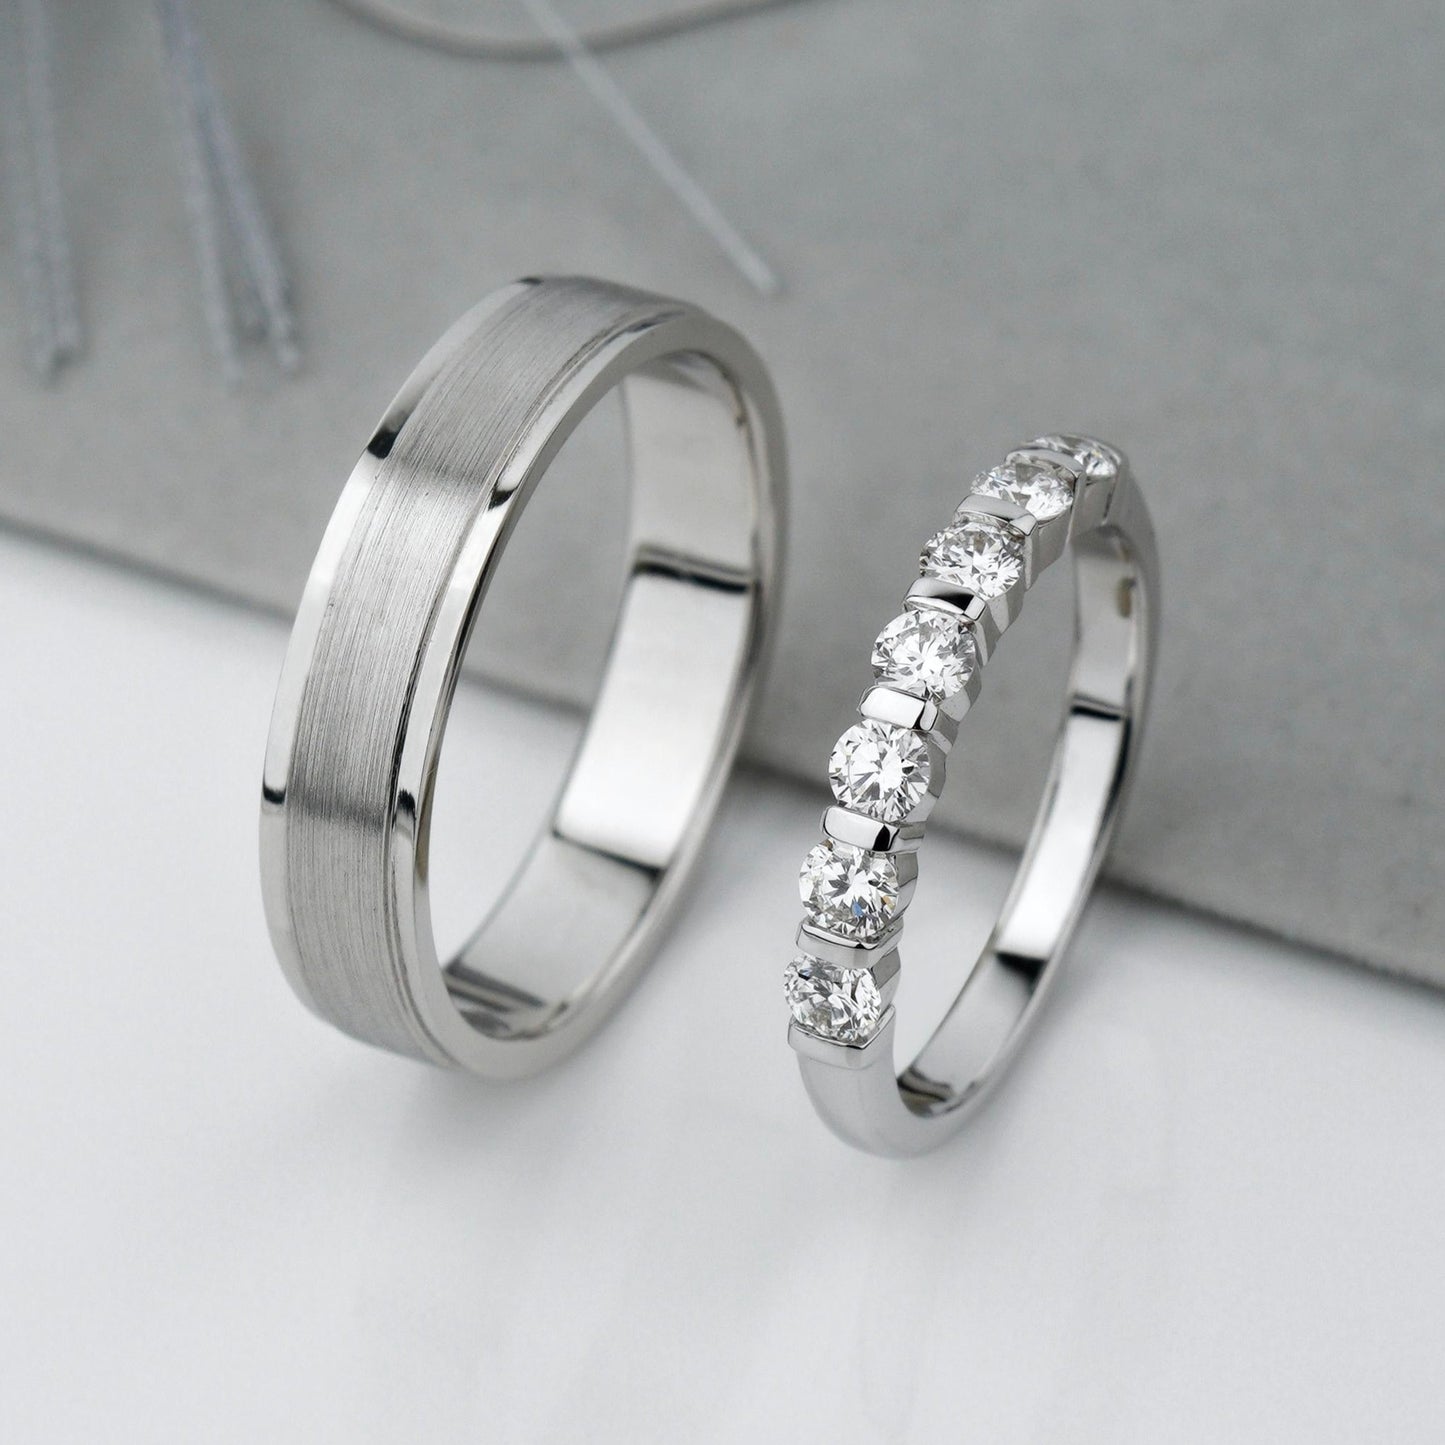 white gold wedding bands with diamonds, his and hers wedding rings set, matching wedding bands for couples, gold couple rings , gold diamond bands, wedding set his and hers, natural diamonds wedding bands